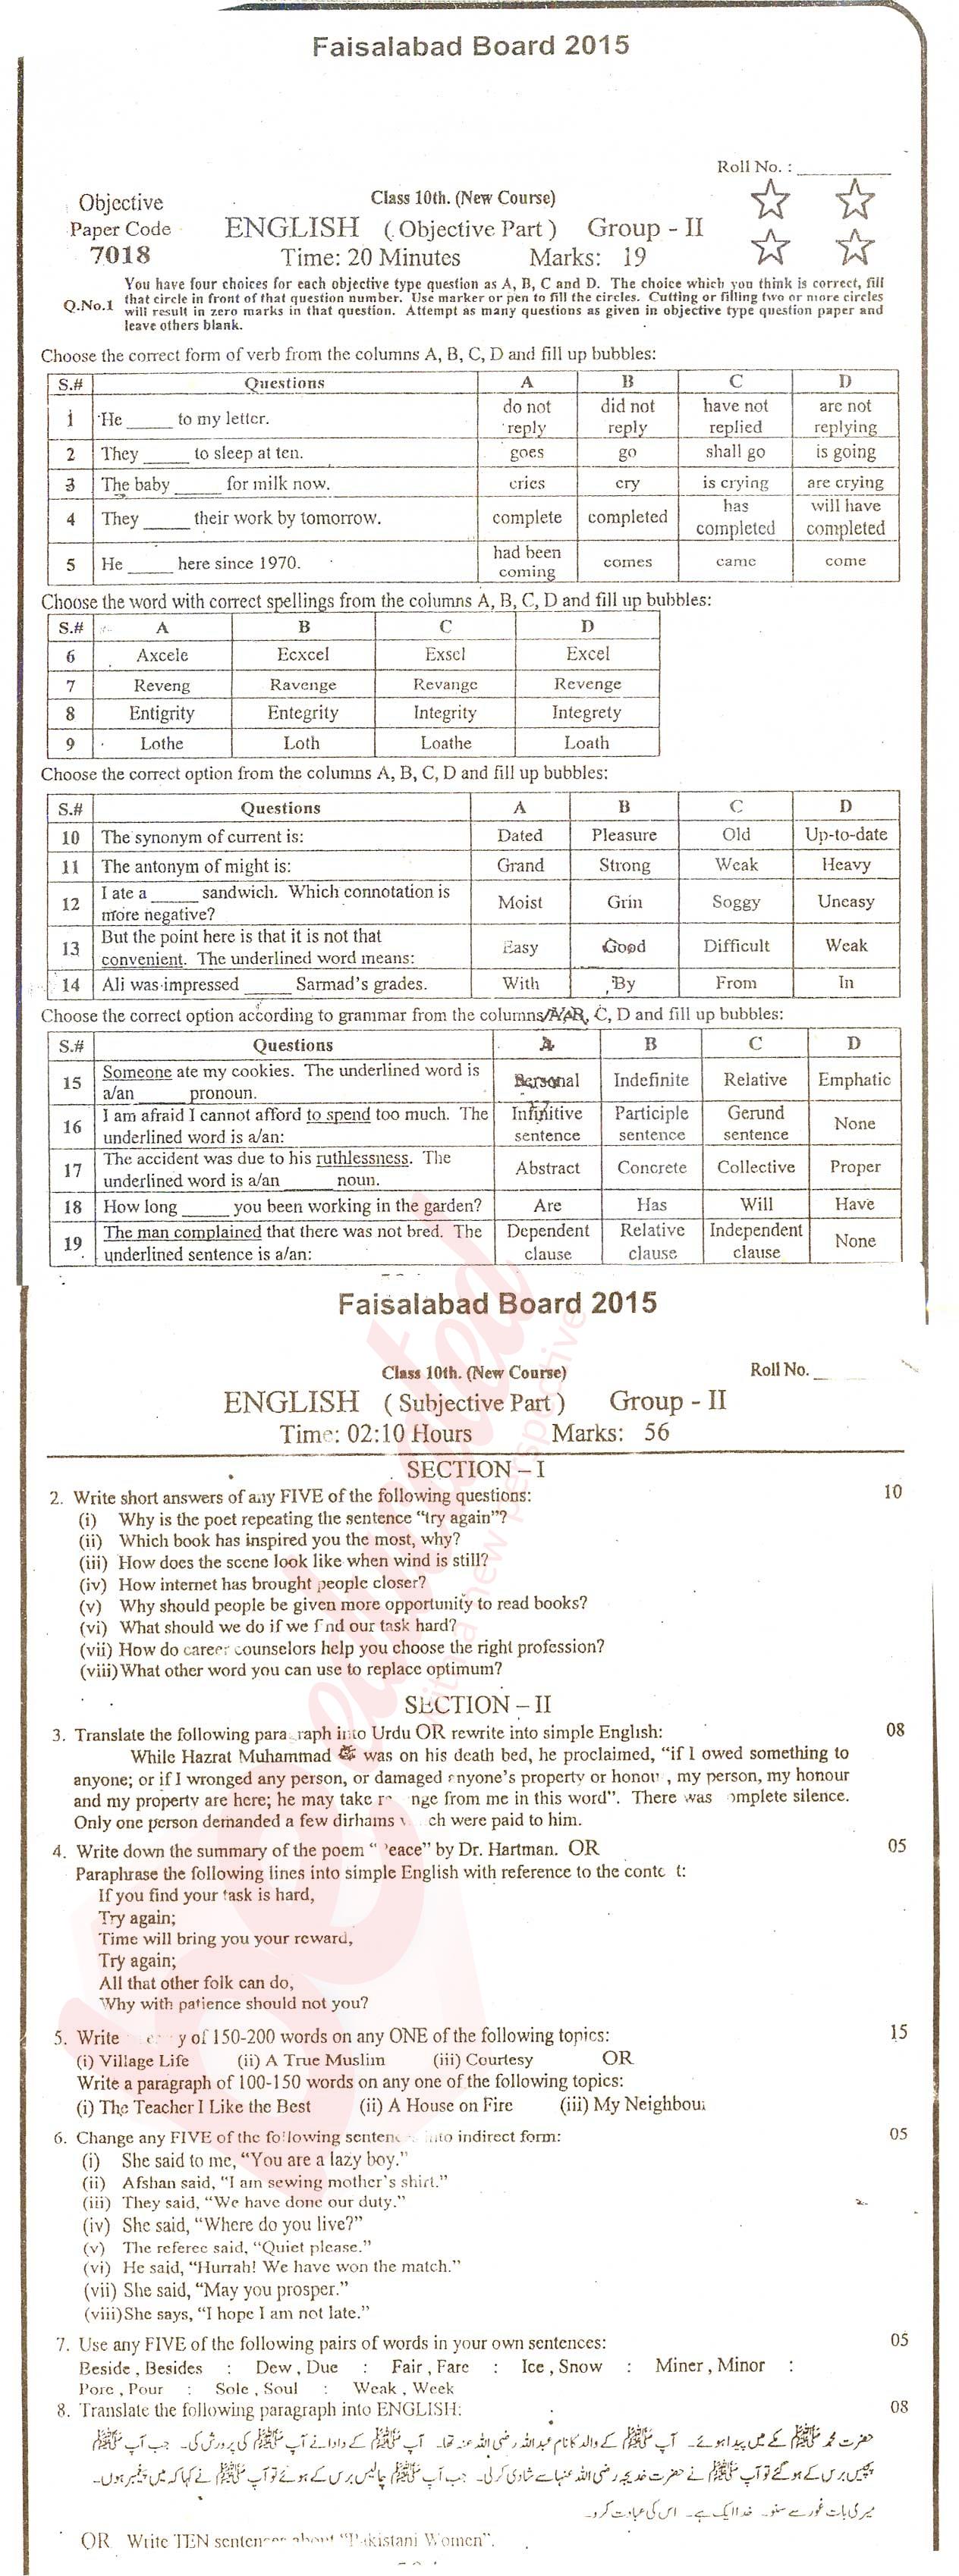 English 10th class Past Paper Group 2 BISE Faisalabad 2015